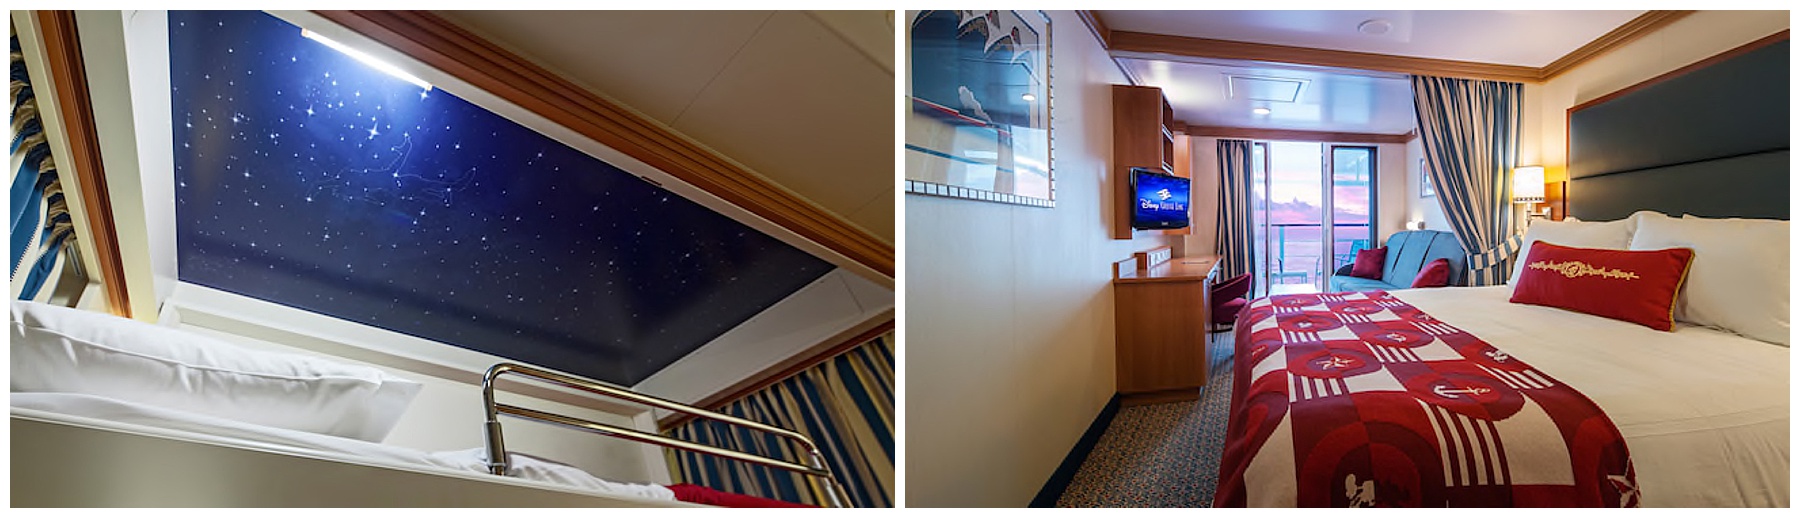 Disney Dream Cruise Review | part 1 - Style Duplicated